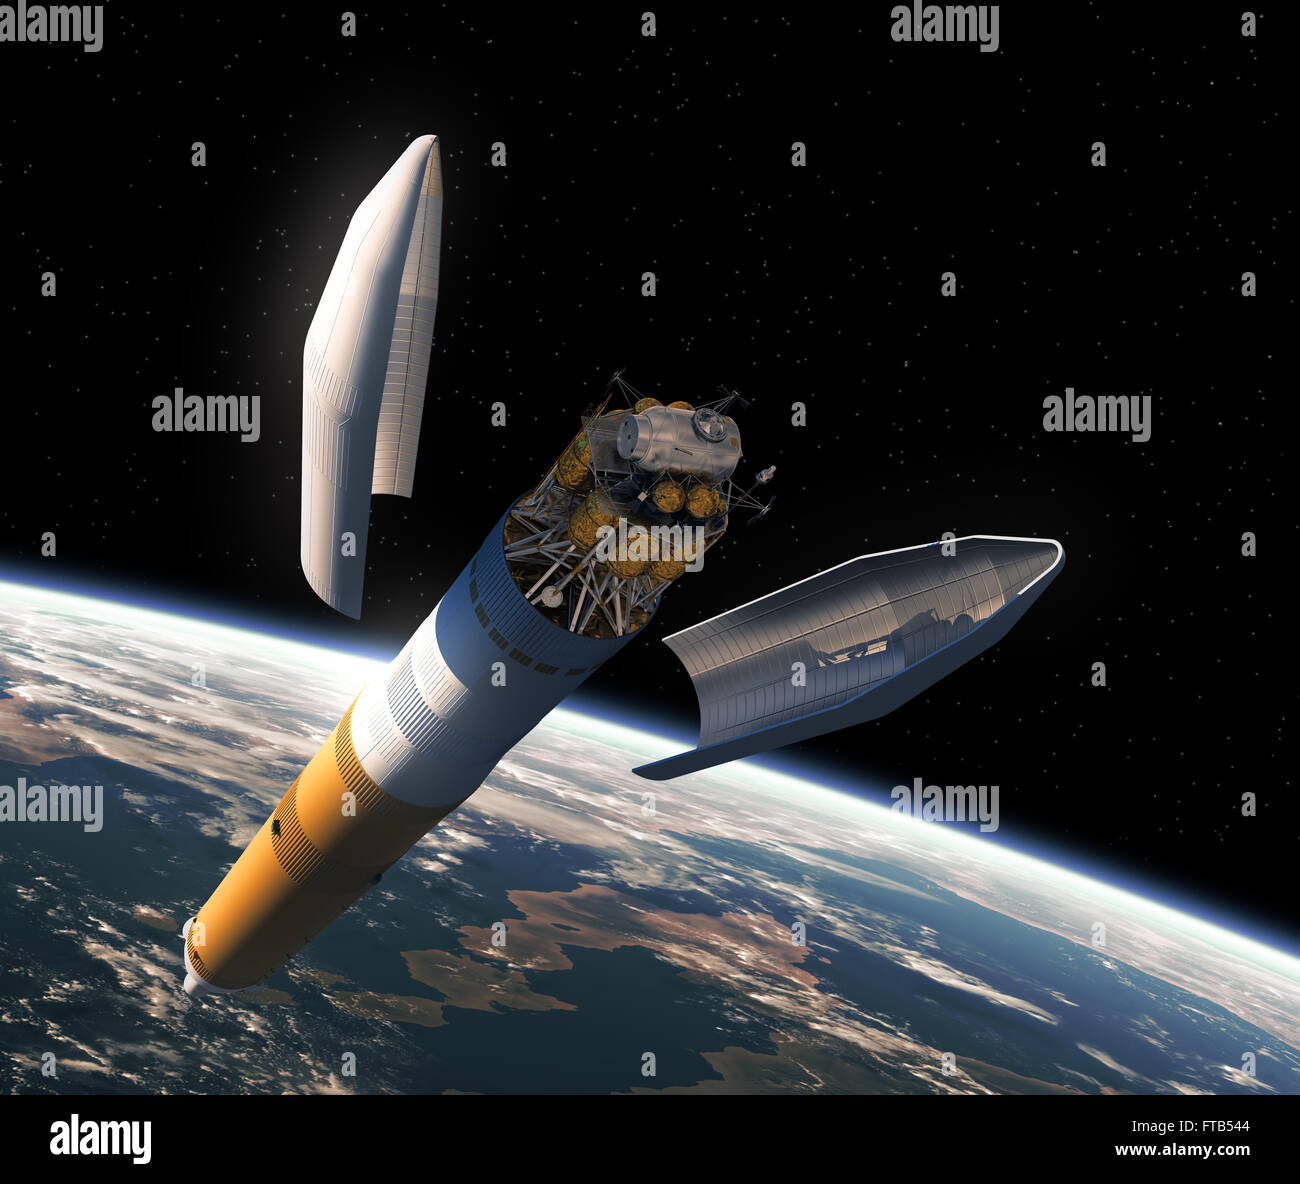 Launching Of Interplanetary Space Station. 3D Scene. Stock Photo